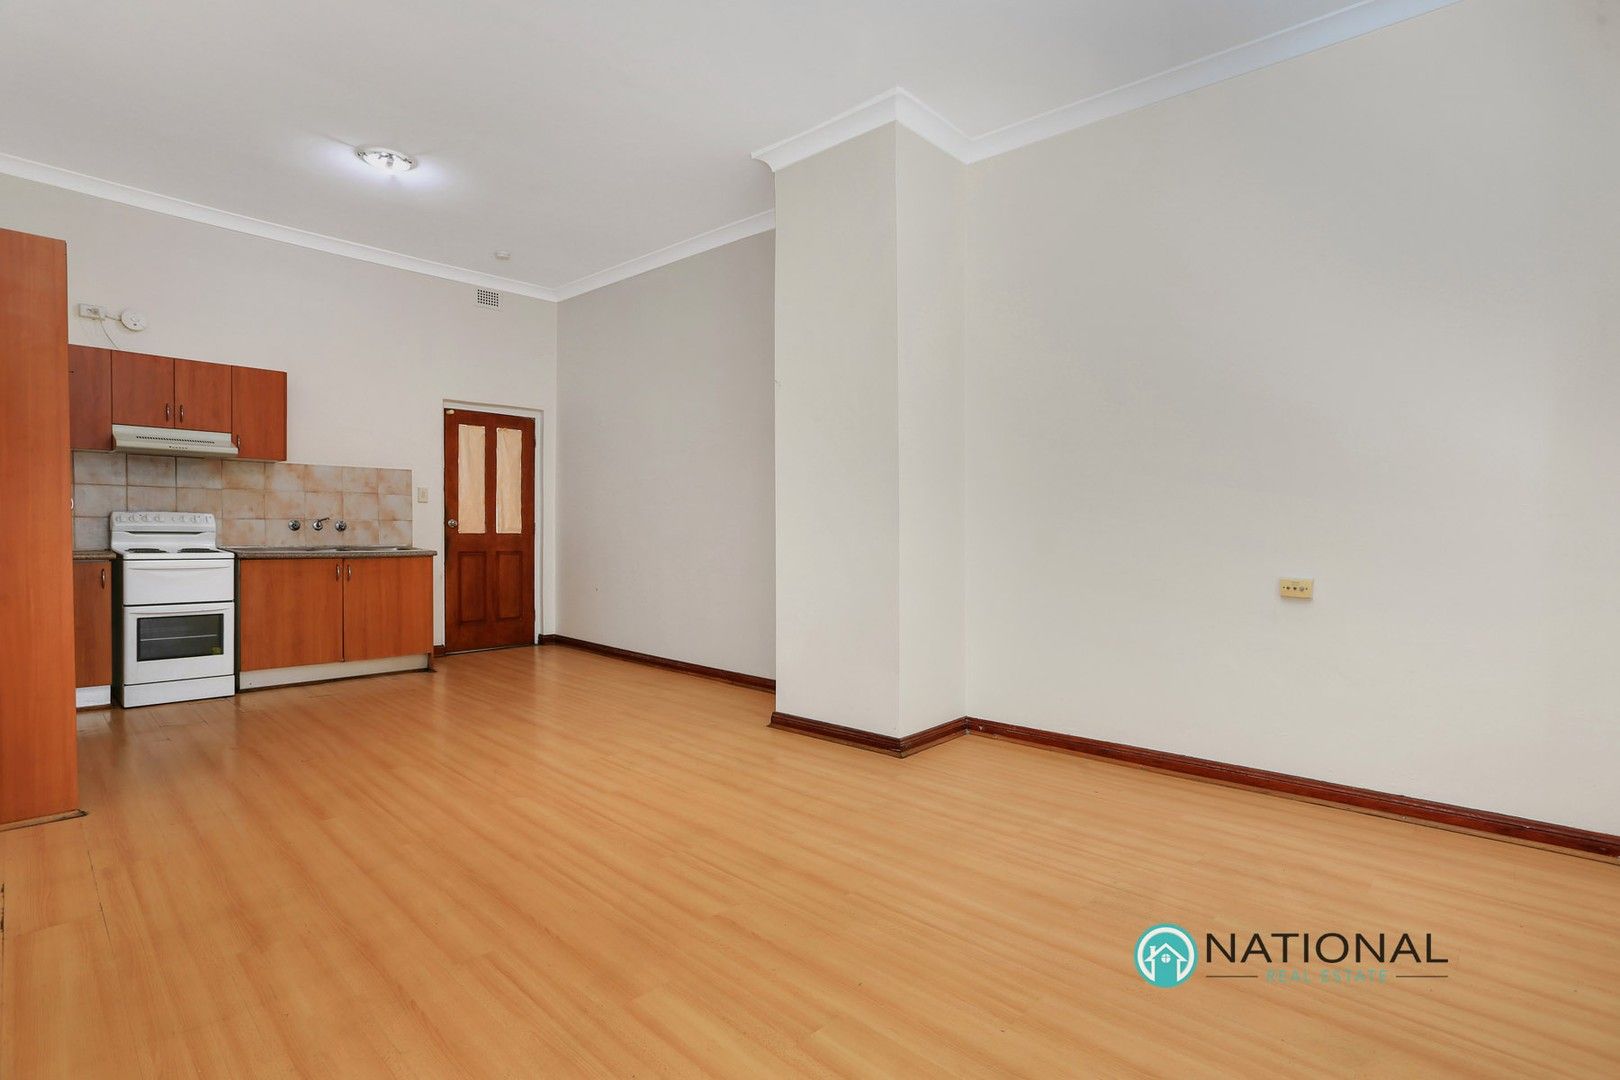 3 bedrooms Apartment / Unit / Flat in 1/329 Guildford Road GUILDFORD NSW, 2161